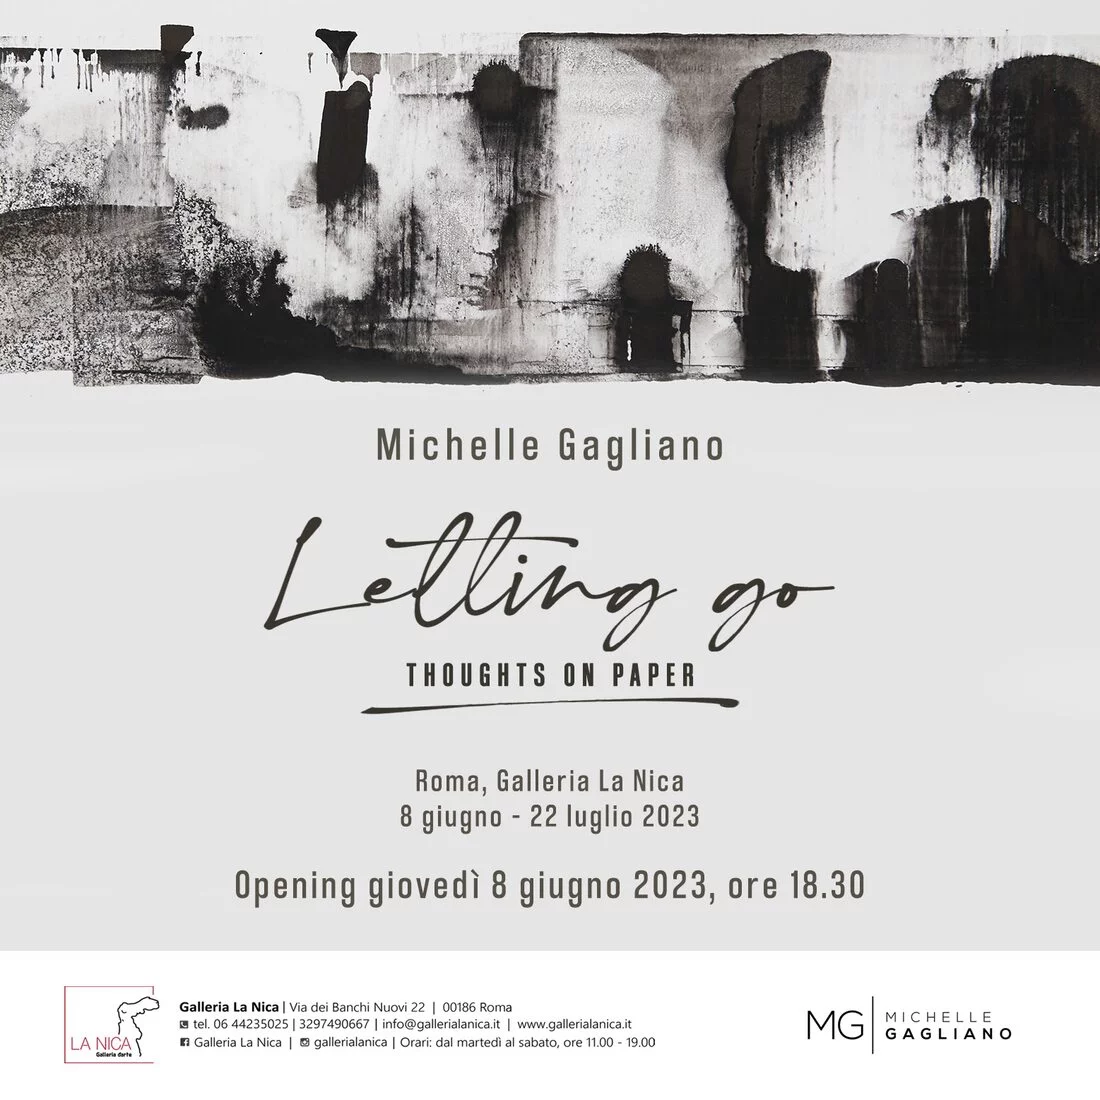 Michelle Gagliano. Letting go - Thoughts on paper